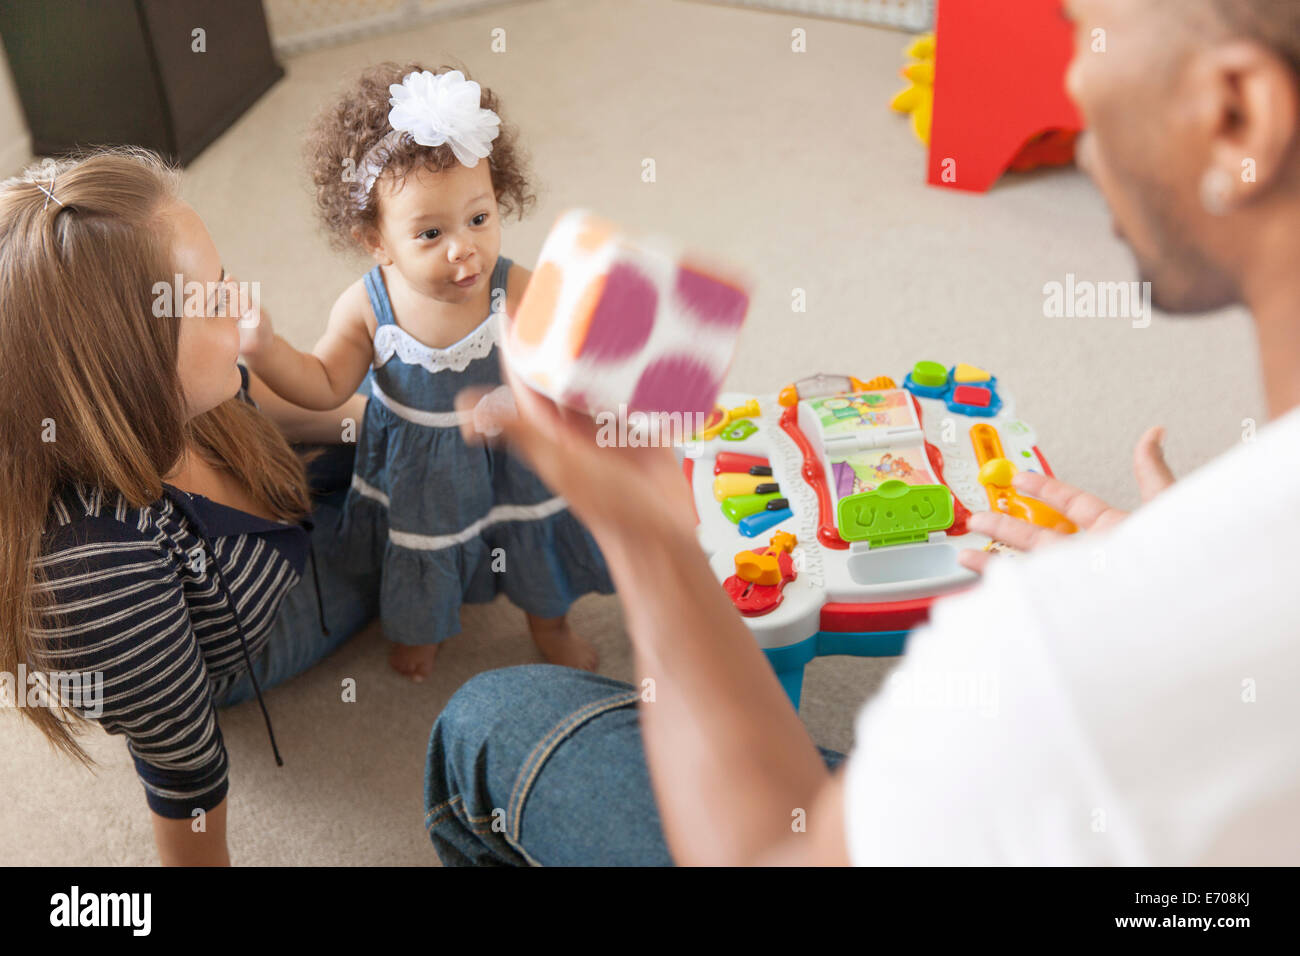 Mother and father playing with young daughter Stock Photo